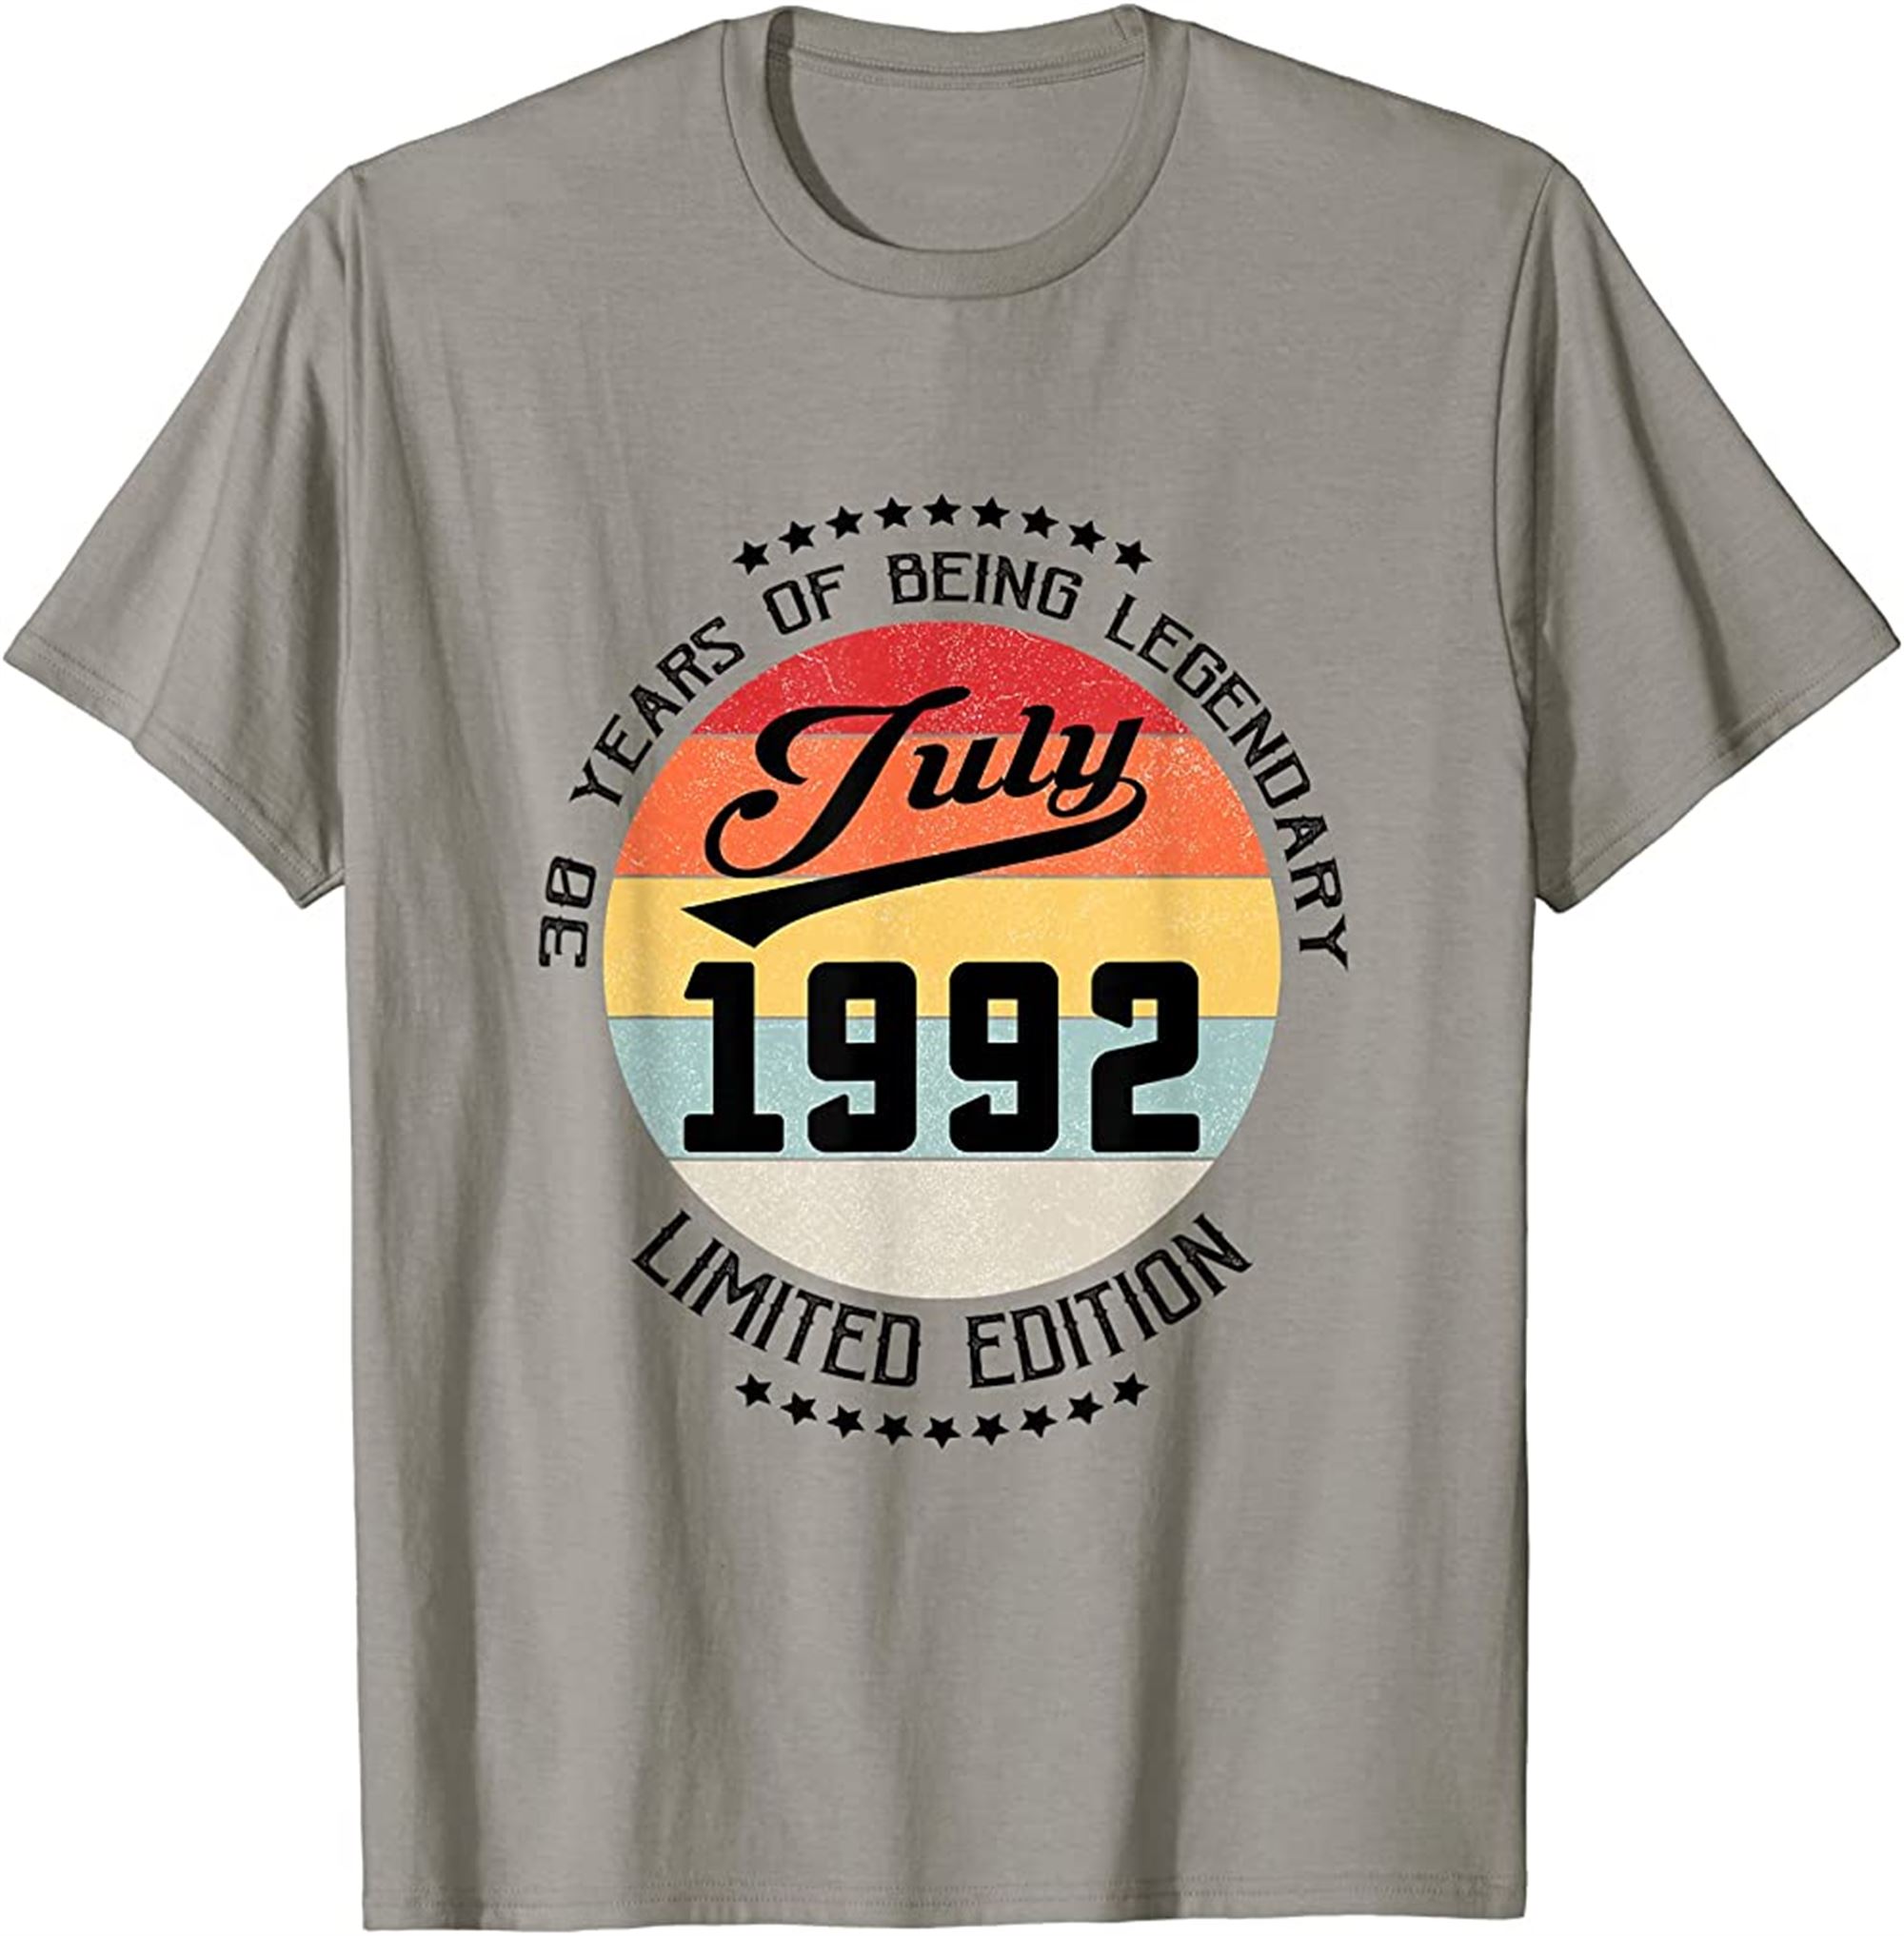 July 1992 30th Birthday Tee 30 Years Of Being Legendary T-shirt Full Size Up To 5xl